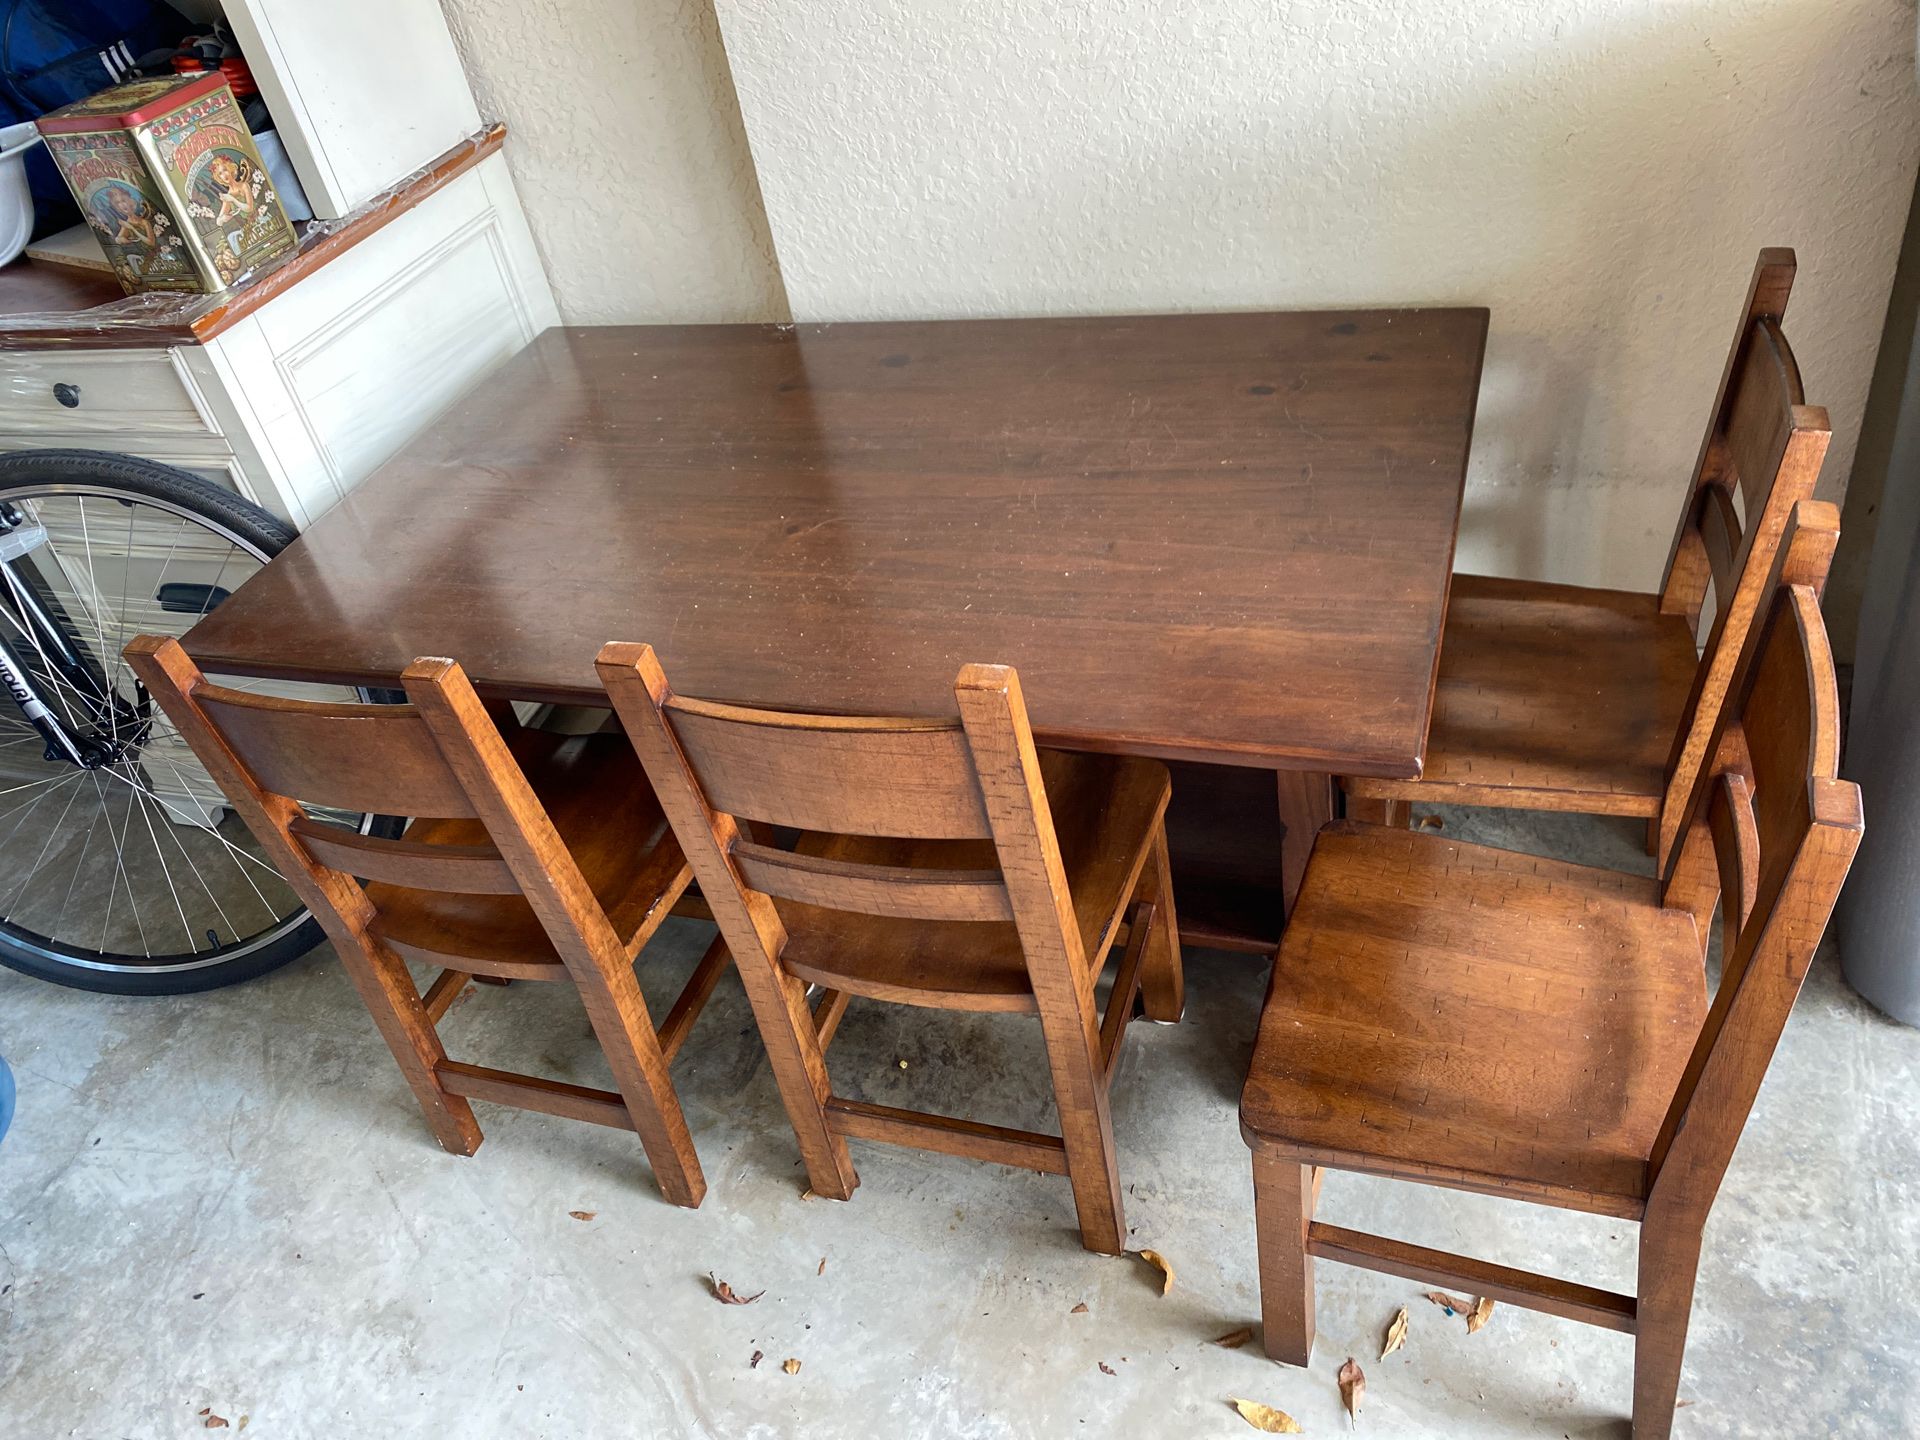 Pottery barn kids table with 4 chairs 100$